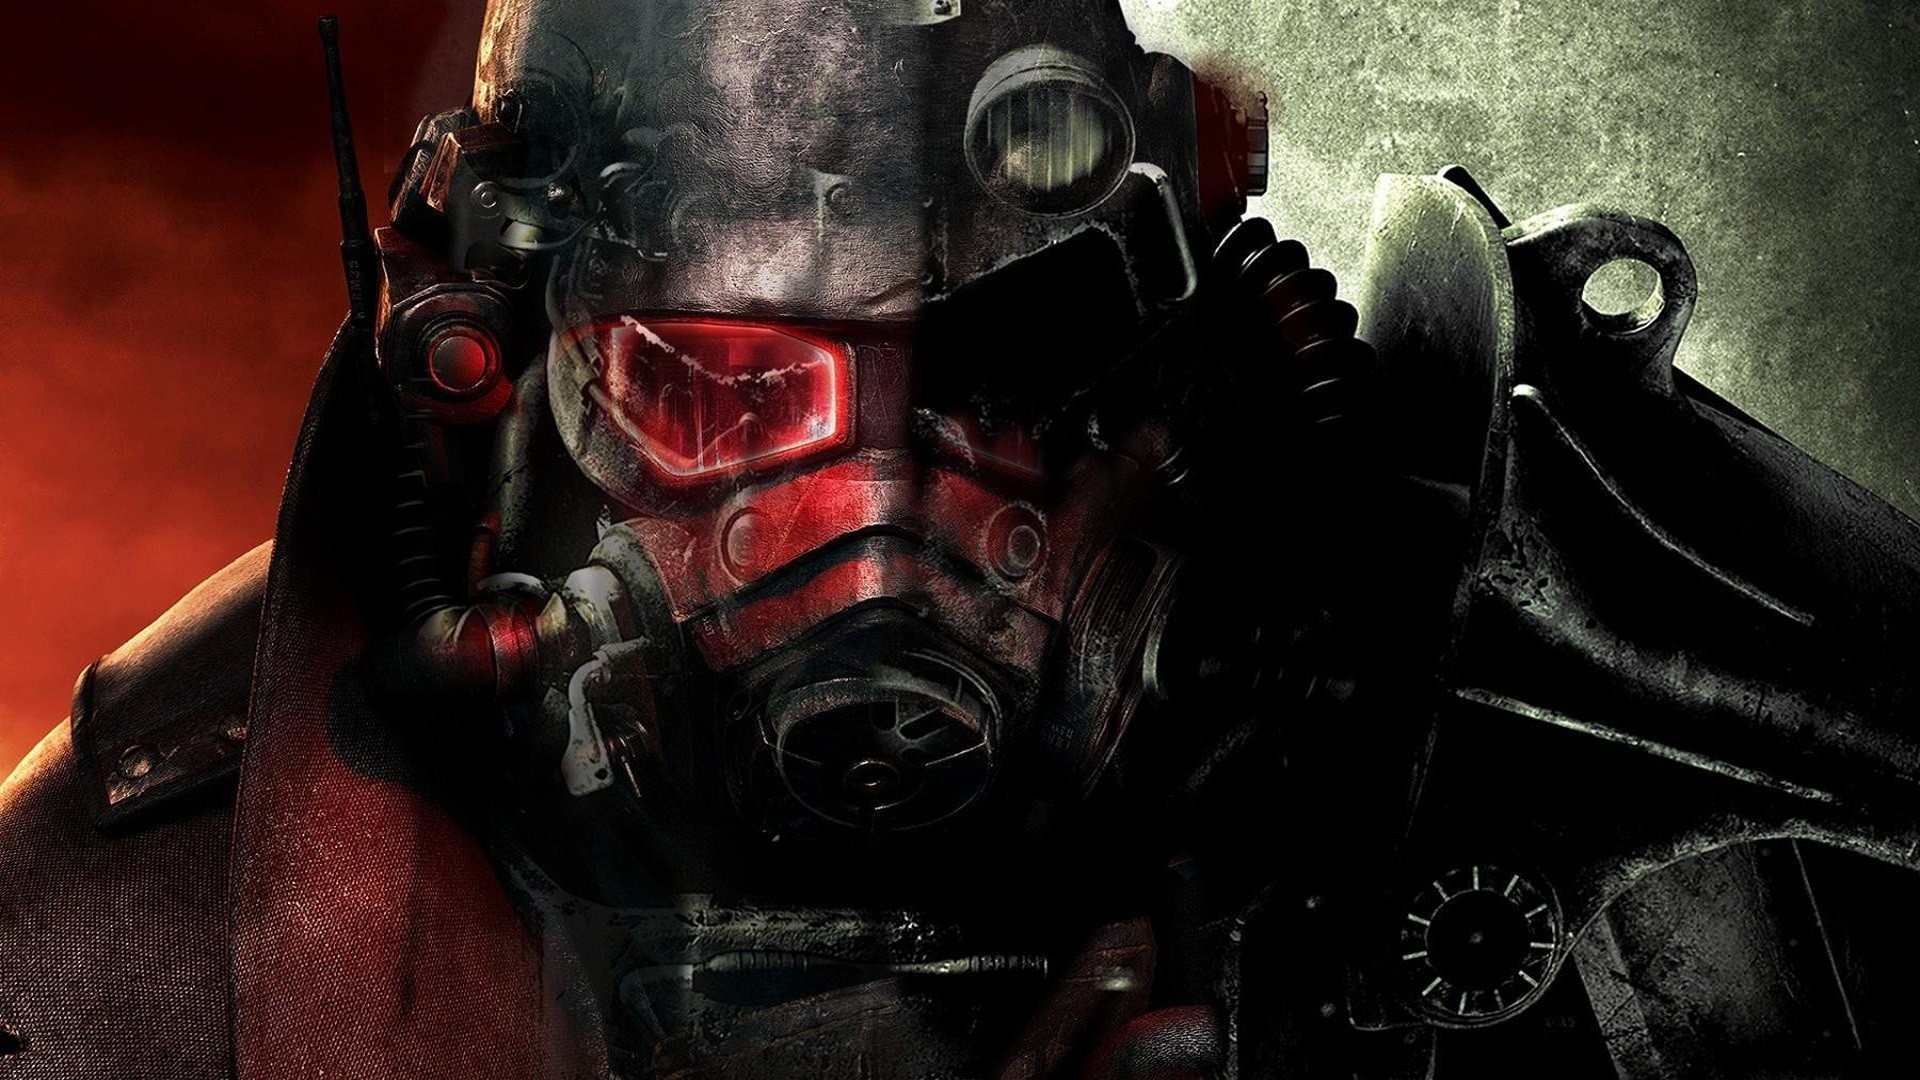 1920x1080 Search Results for “fallout new vegas ncr wallpaper hd” – Adorable  Wallpapers